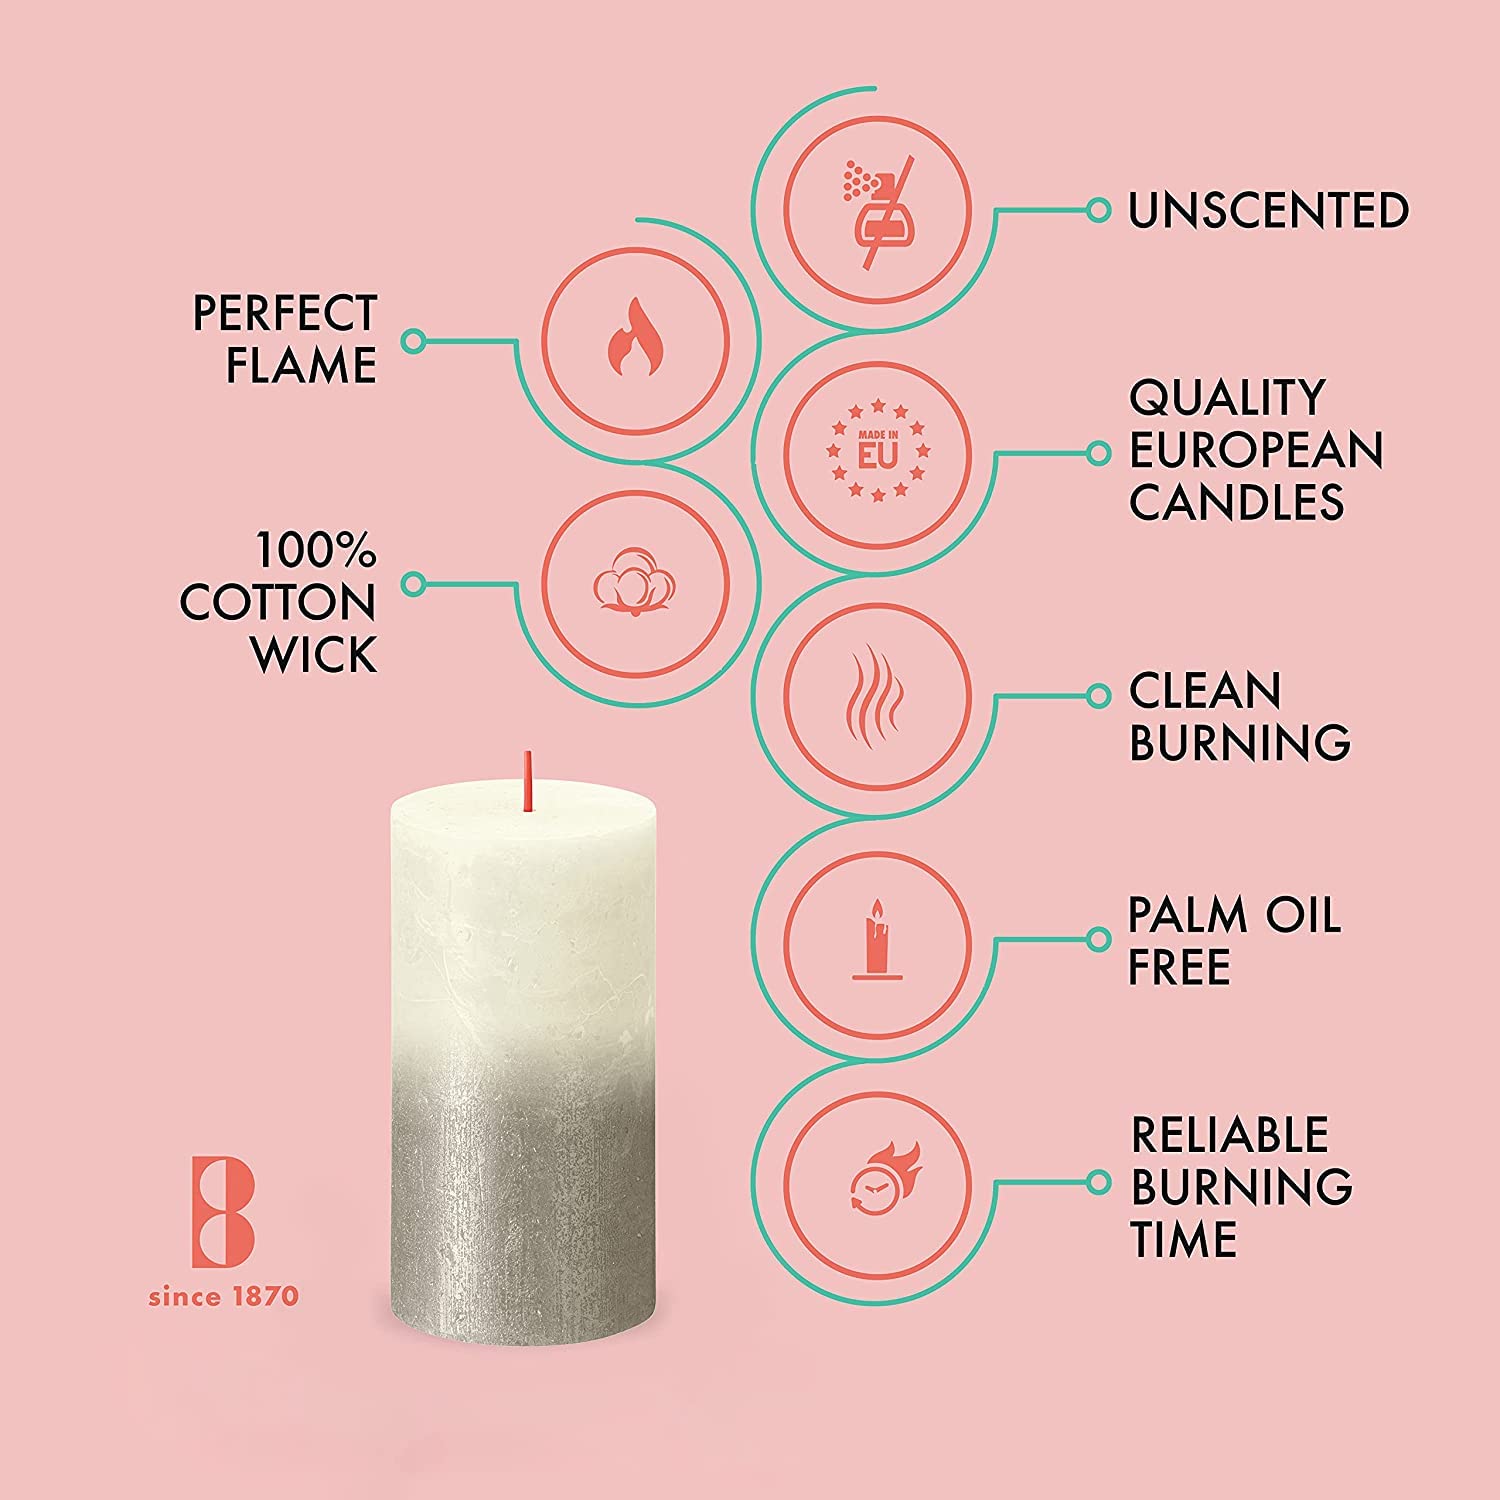 BOLSIUS 4 Pack Ivory/Silver Sunset Rustic Metallic Pillar Candles - 2.75 X 3.25 Inches - Fine European Quality - Natural Eco-Friendly Plant-Based Wax - Unscented Dripless Smokeless 35 Hour Candles  - Like New